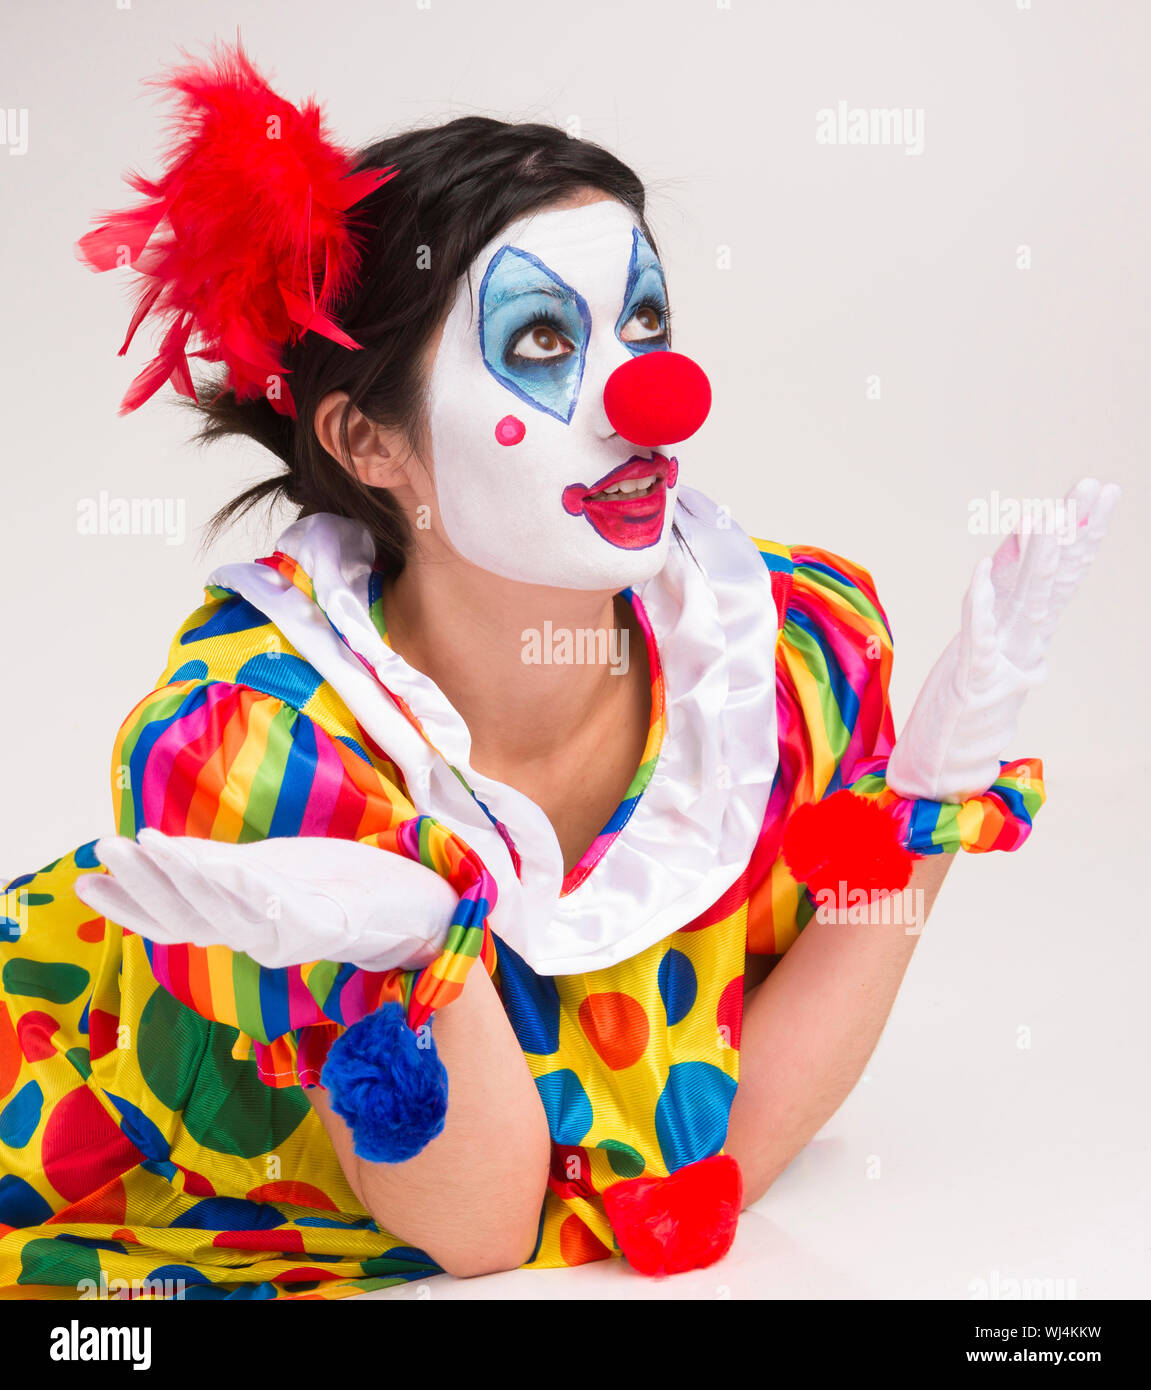 Clown; Circus; Face Paint; Female; Human Role; Behavior; Ecstatic; Cheerful; Studio Shot; Looking At Camera; Entertainment; Red; White; Performer; Iso Stock Photo